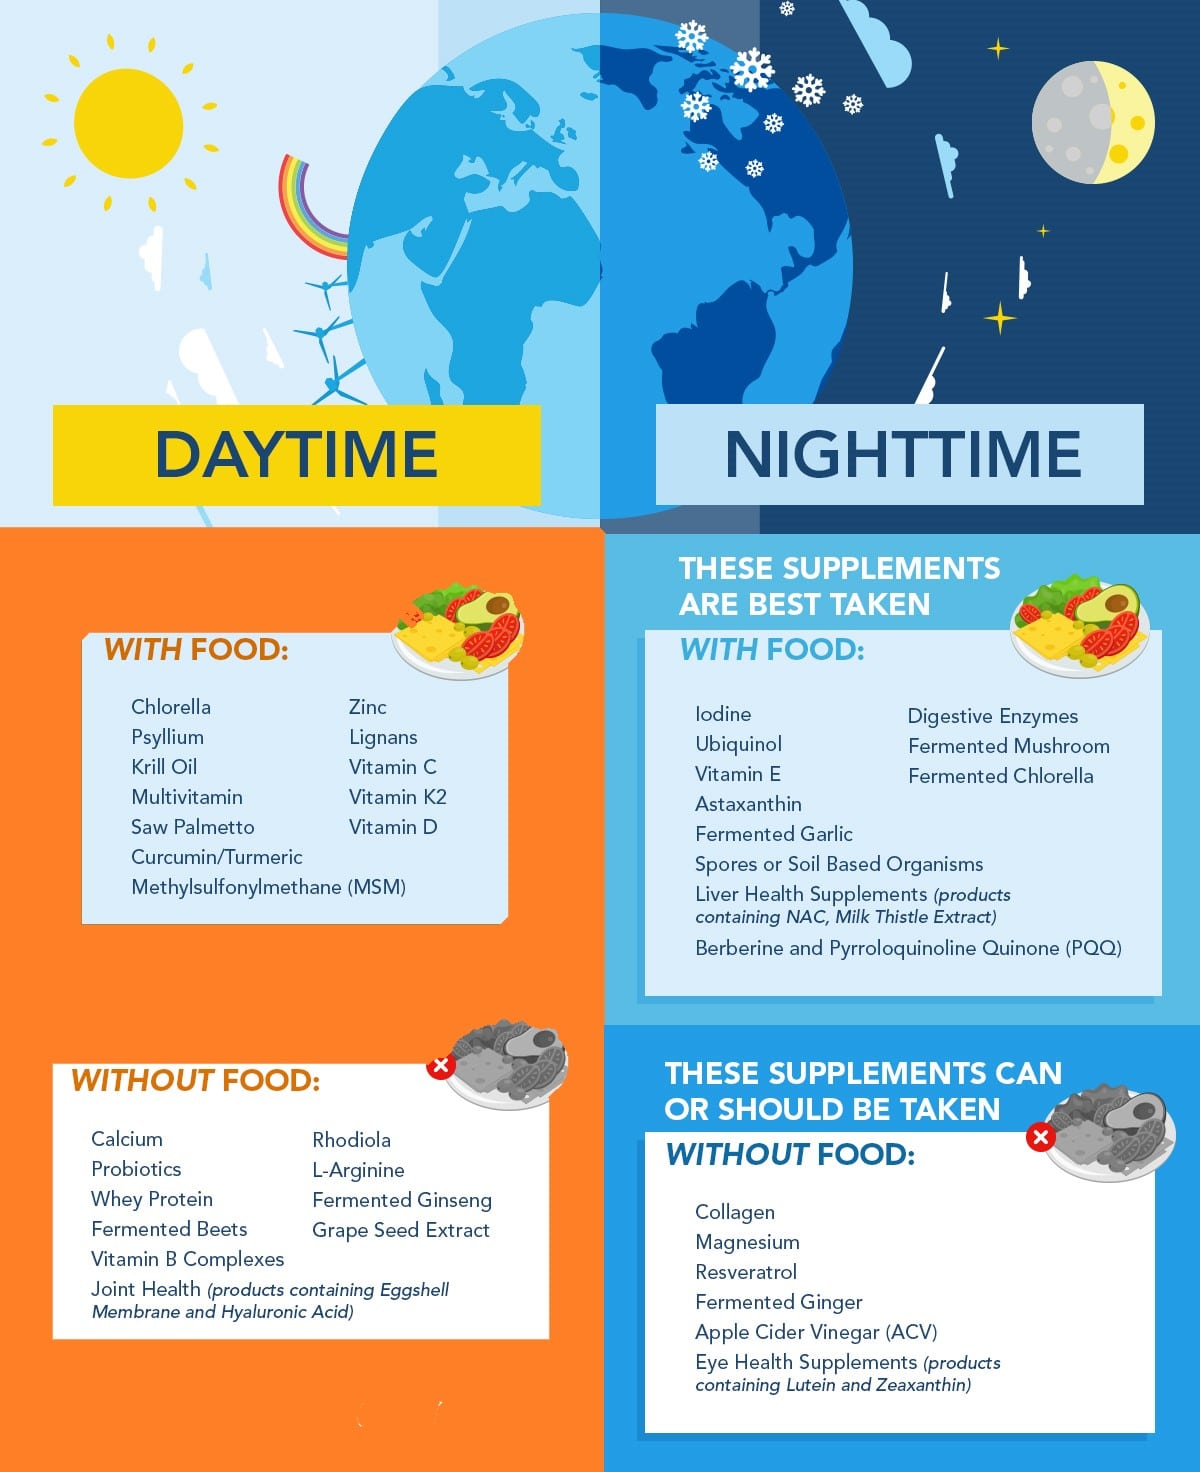 Simple Guide For the Timing of Nutritional Supplements